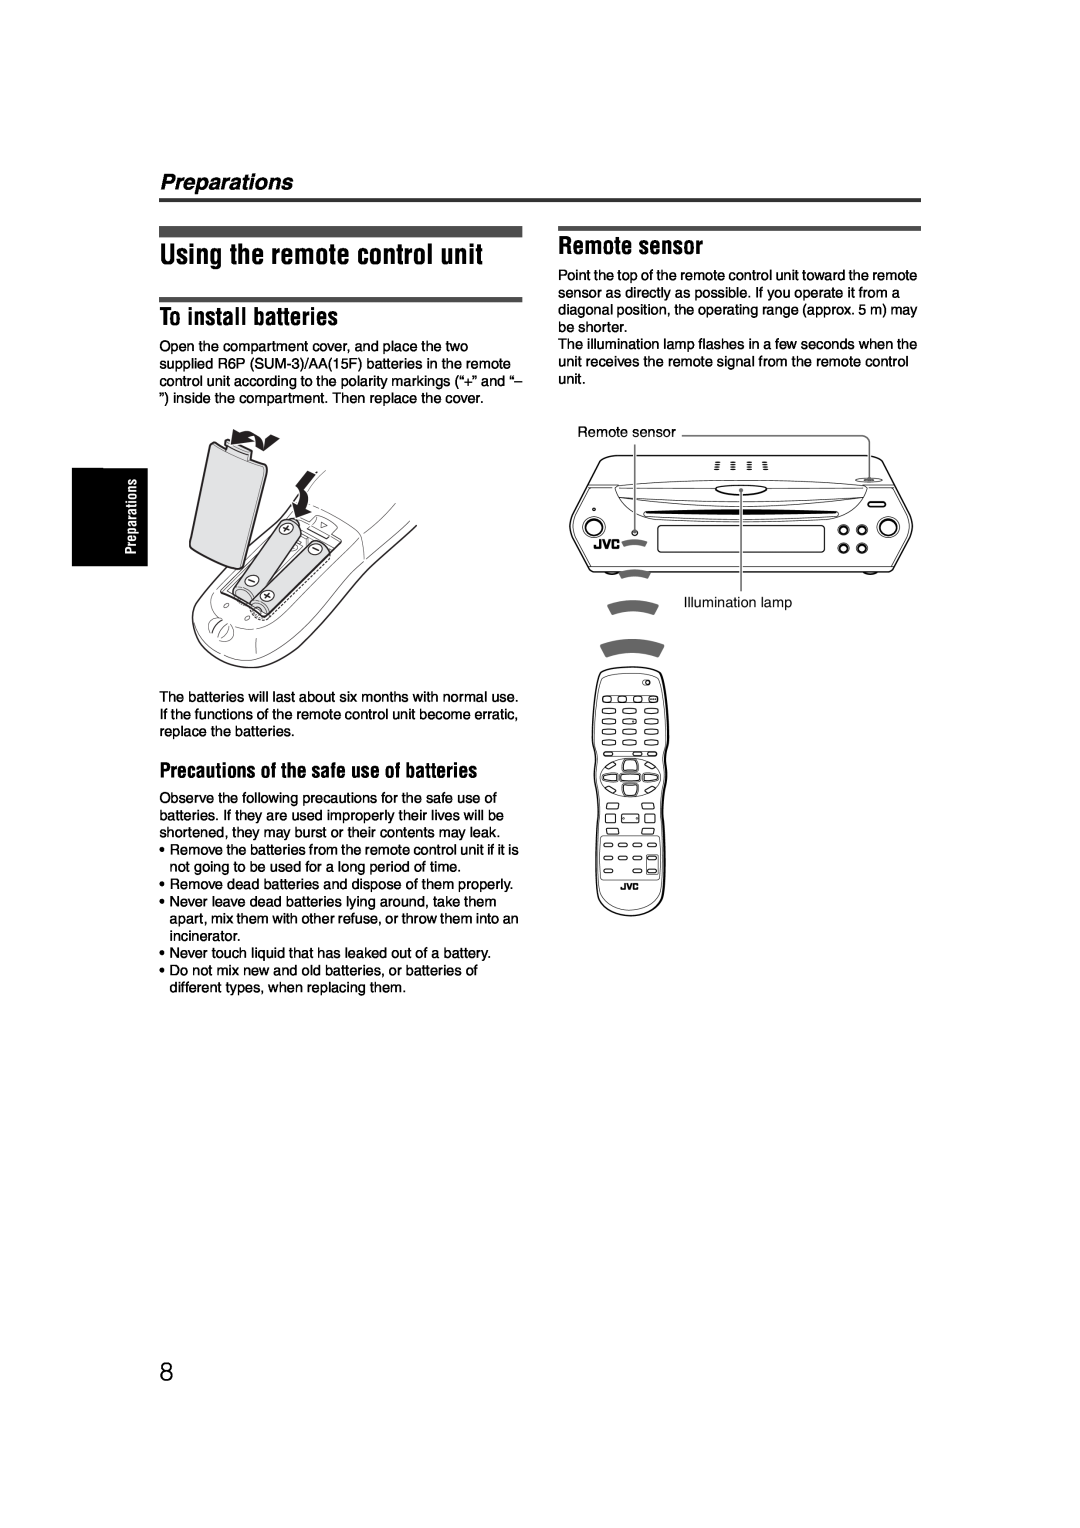 JVC LET0227-003A manual Using the remote control unit, To install batteries, Remote sensor, Preparations 